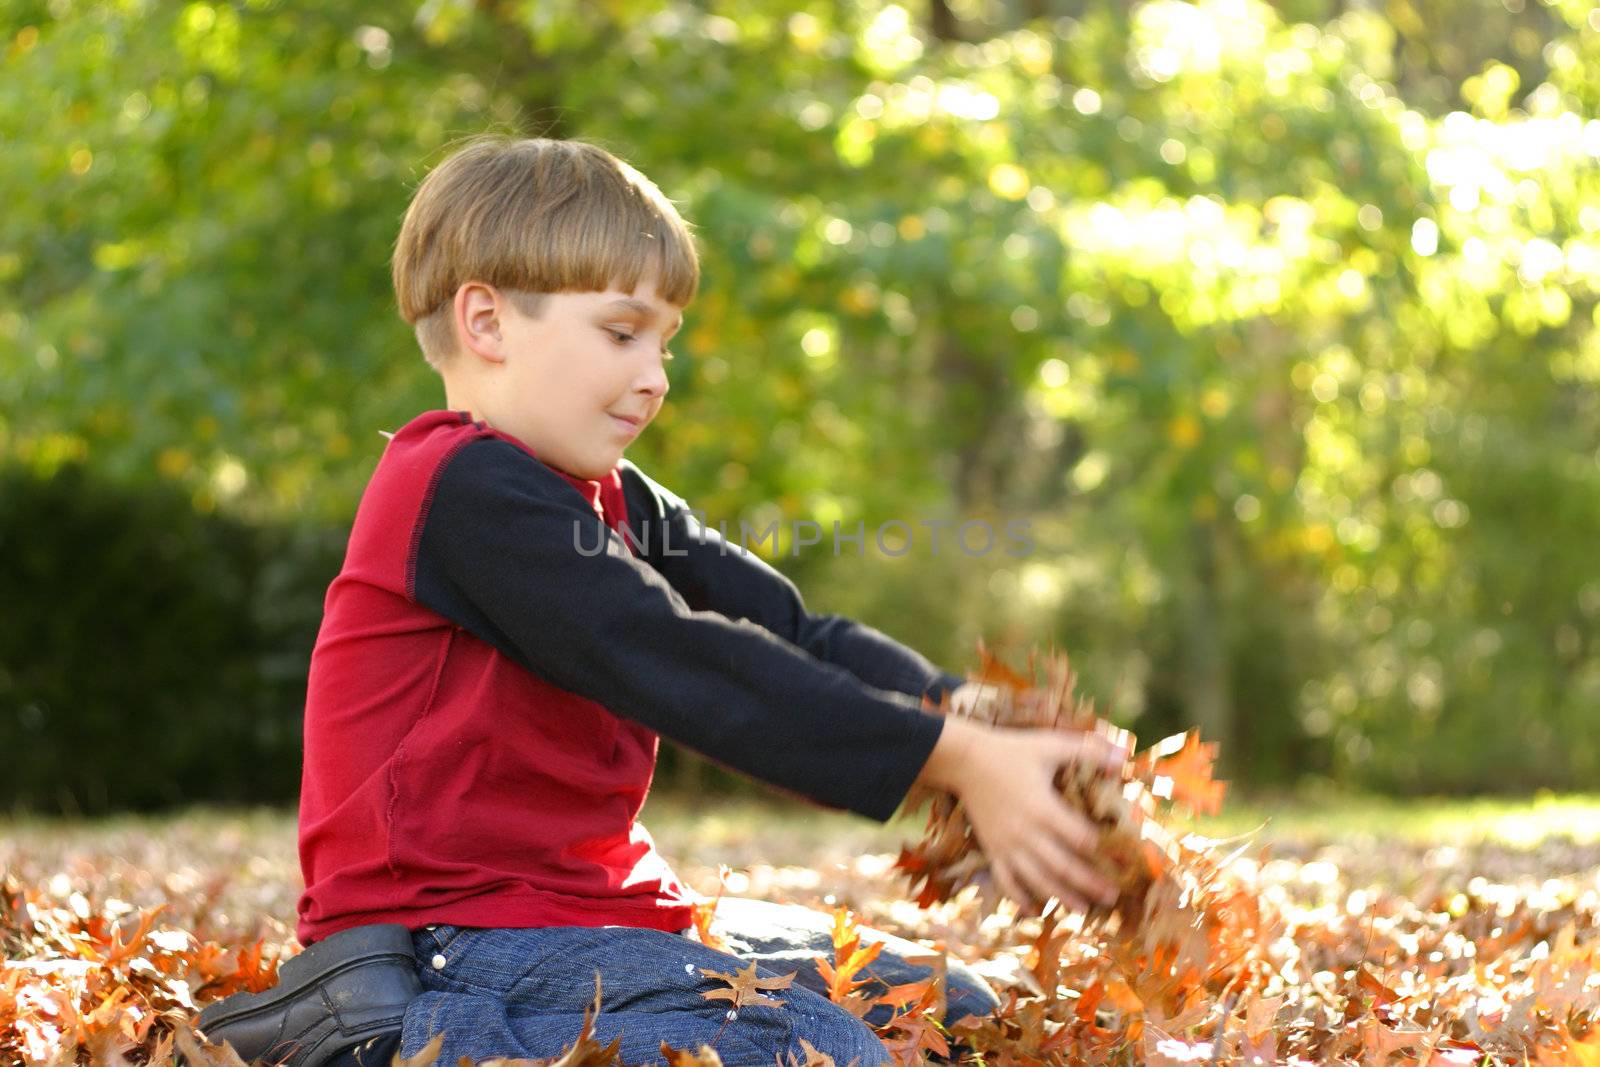 A child playing amongst fallen leaves.  There is motion in his  arms., hands and the leaves he is holding.
400iso